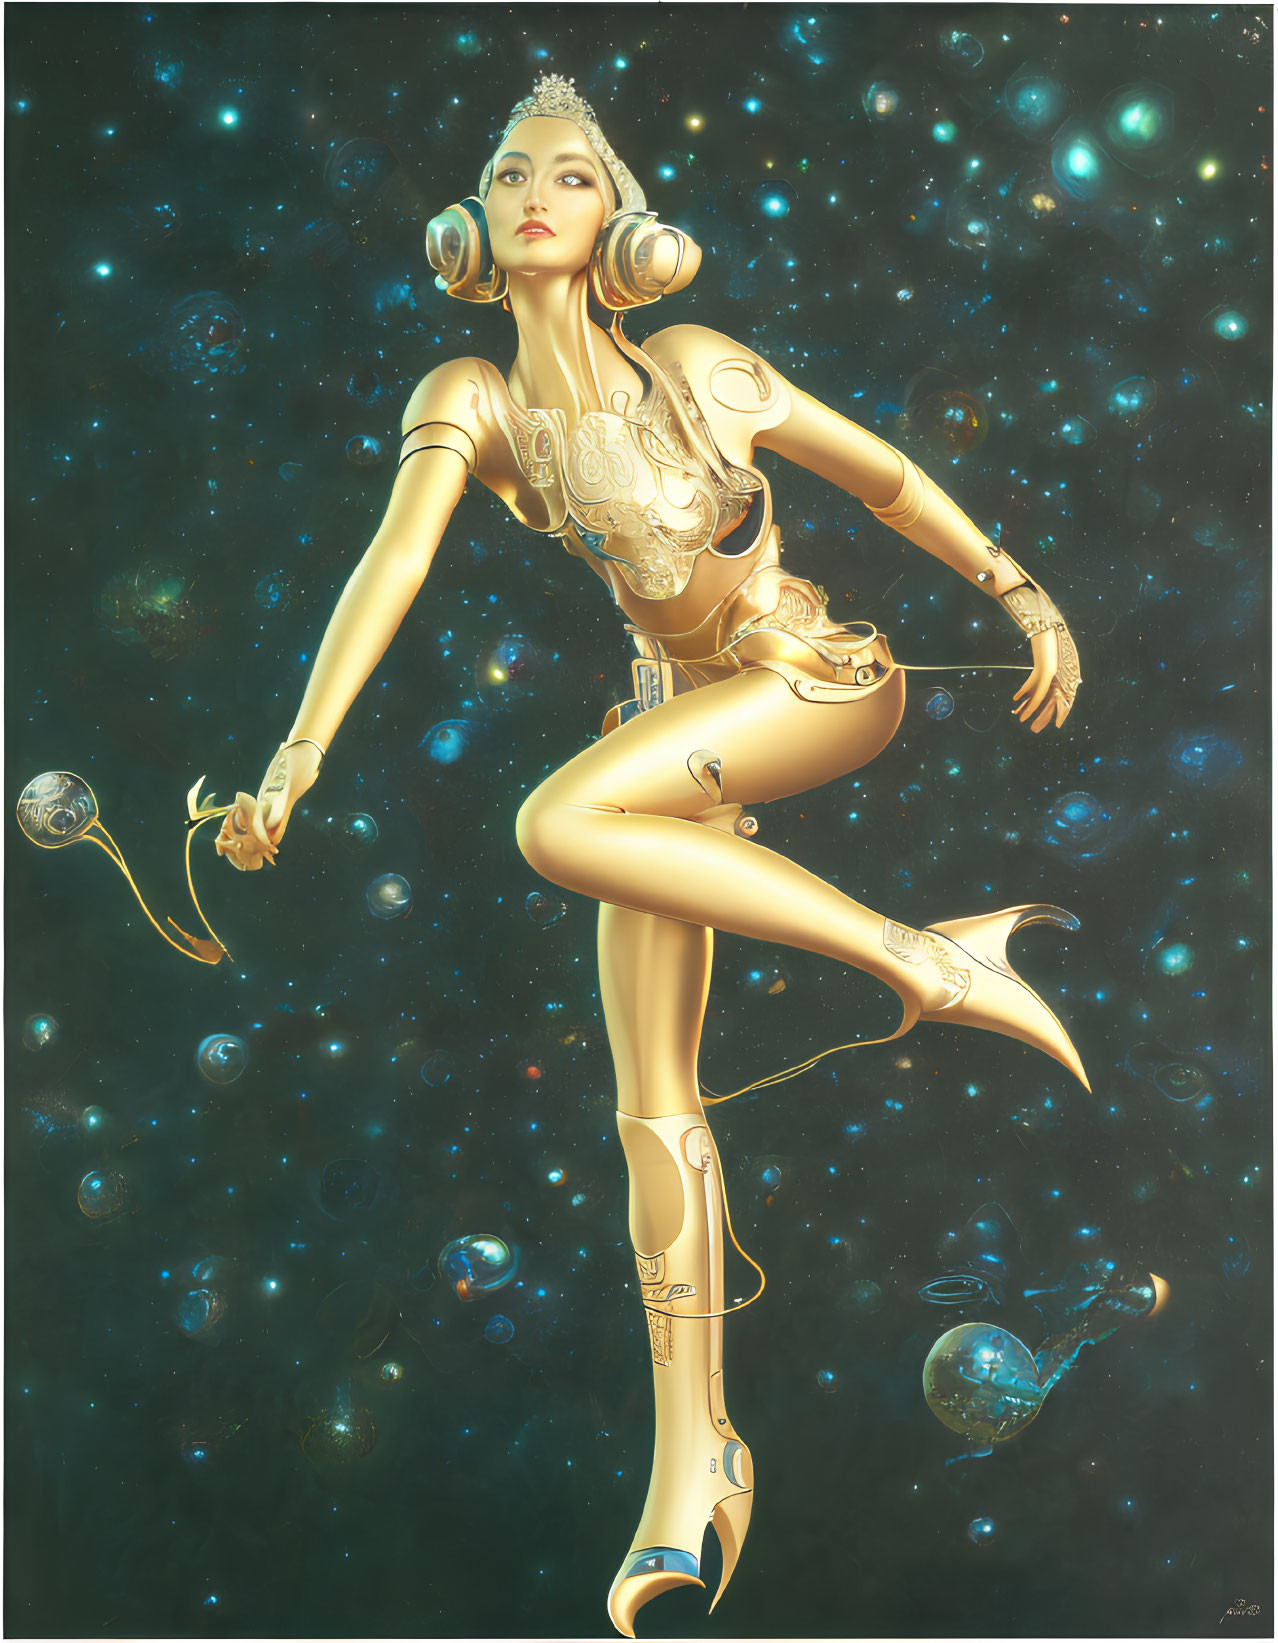 Futuristic female humanoid in gold and white space suit among colorful cosmic bodies